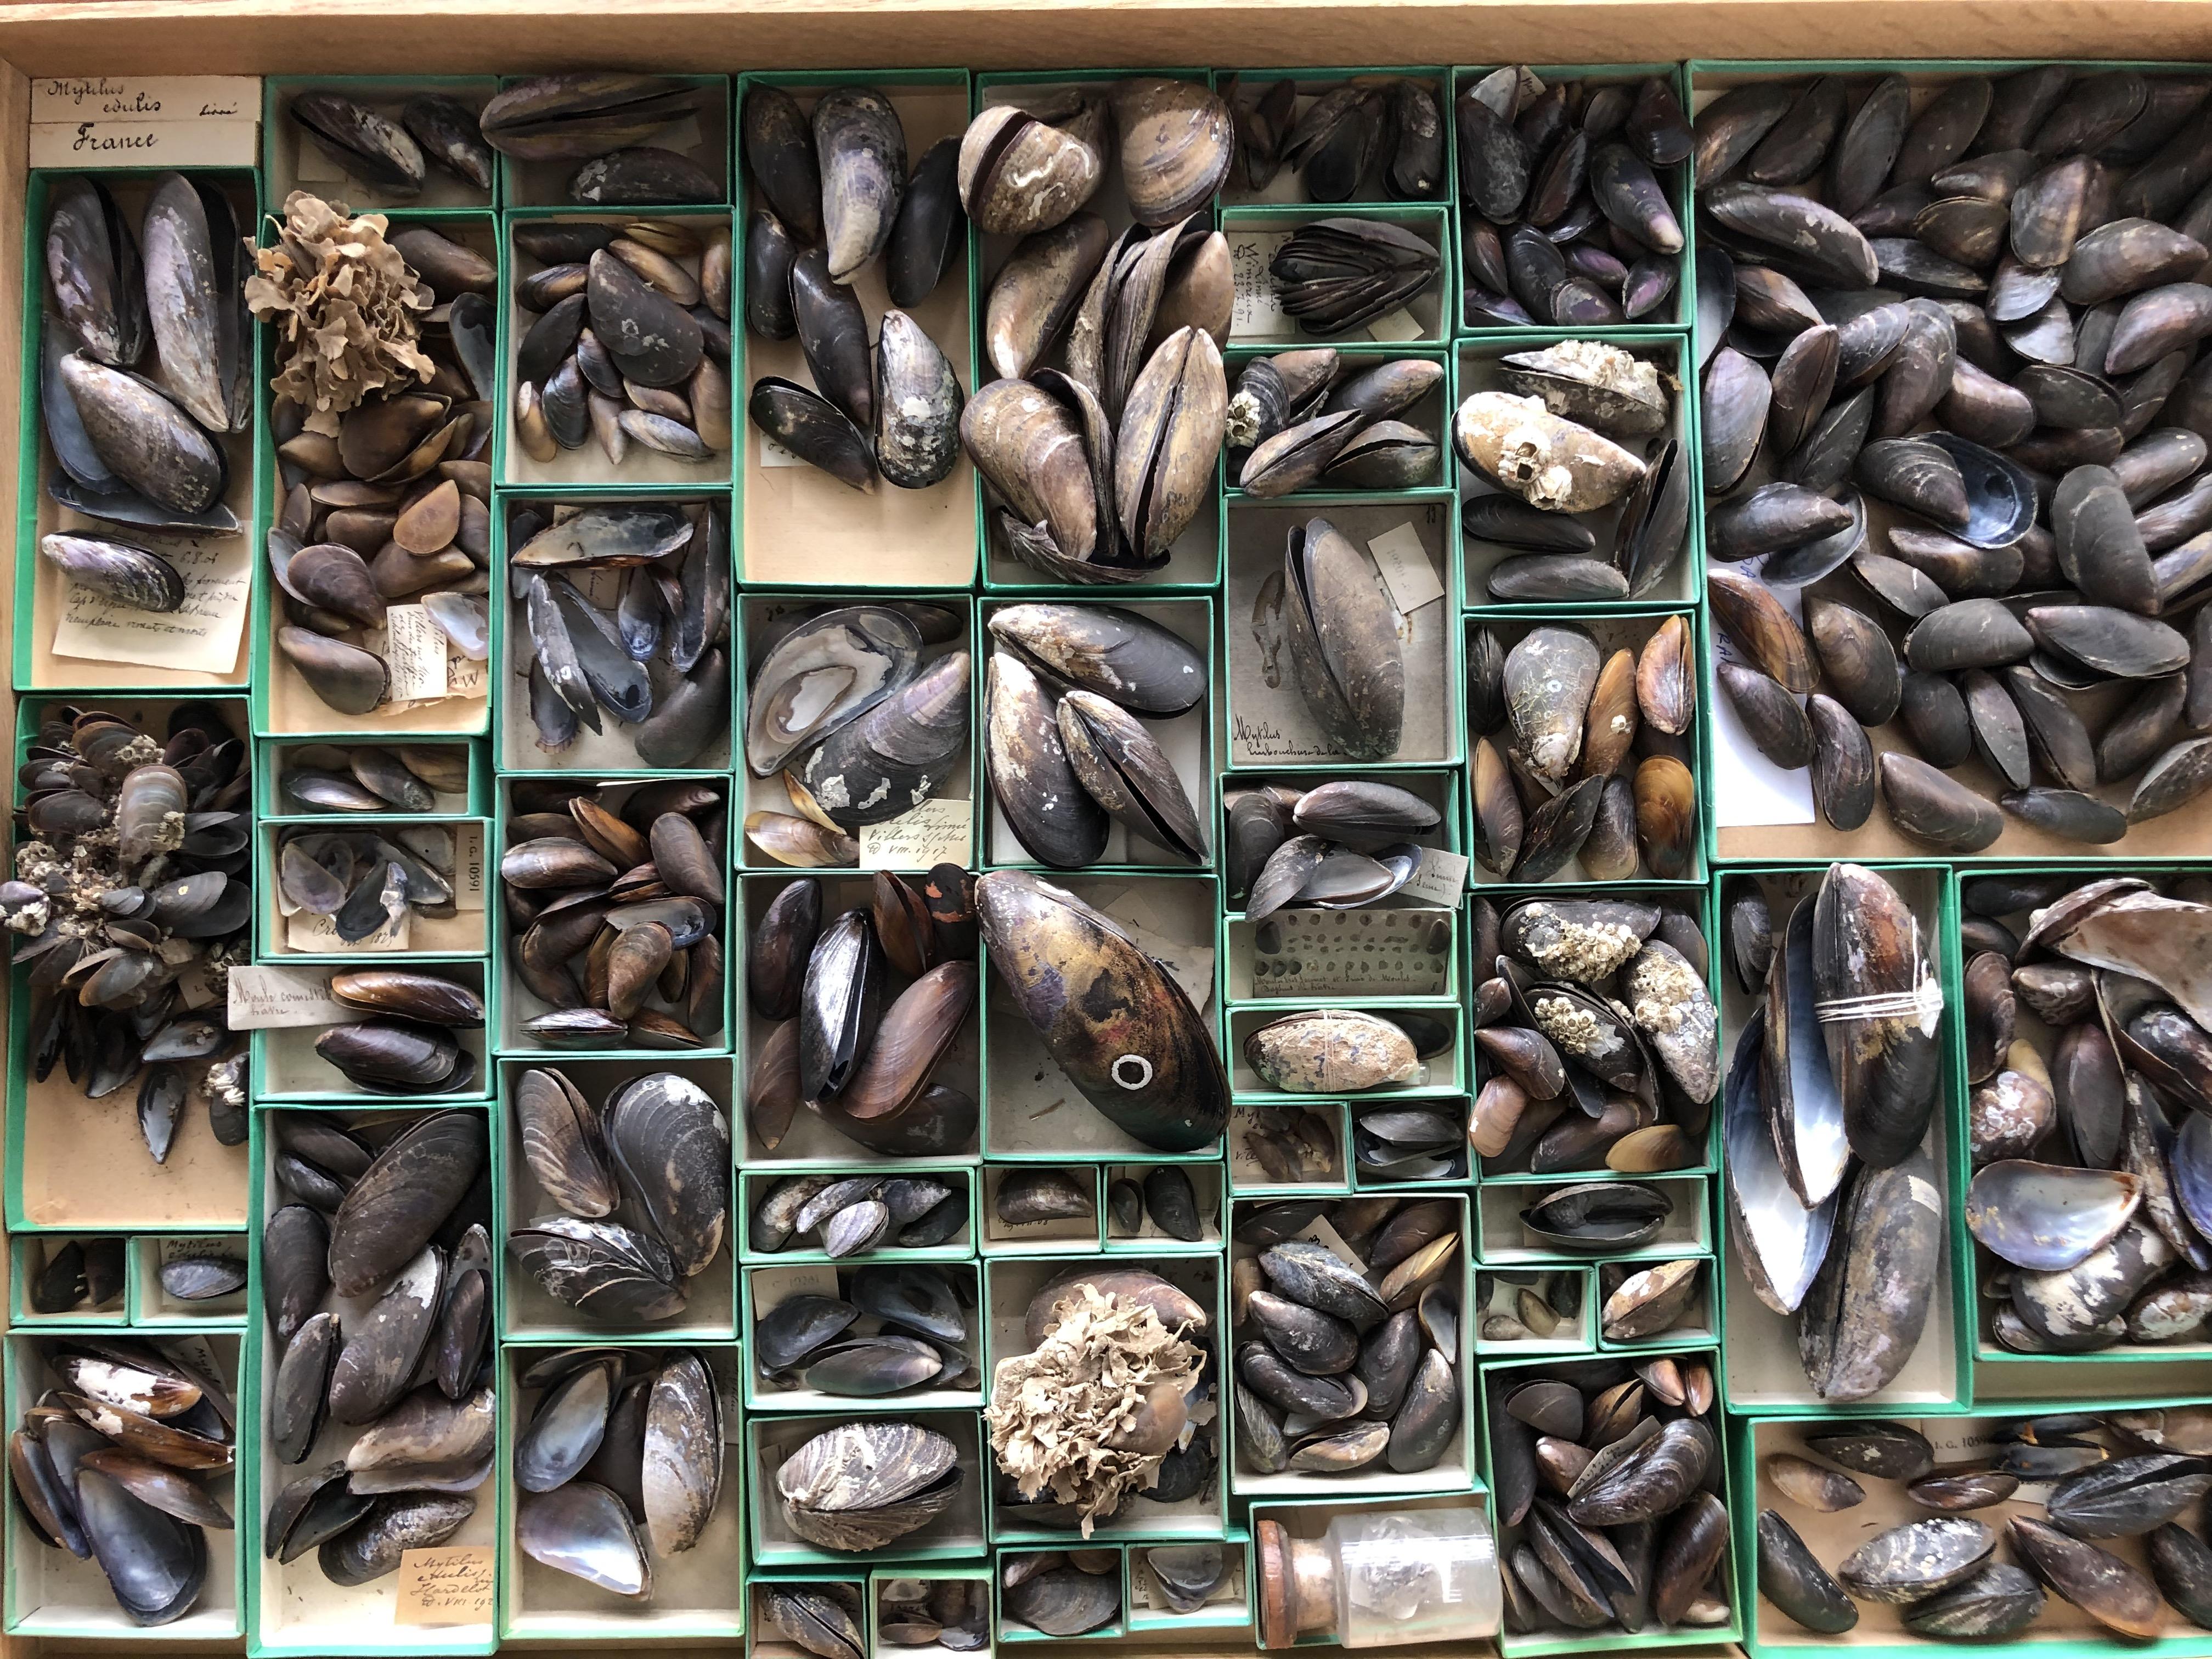 Mussels in the collections of the Institute of Natural Sciences